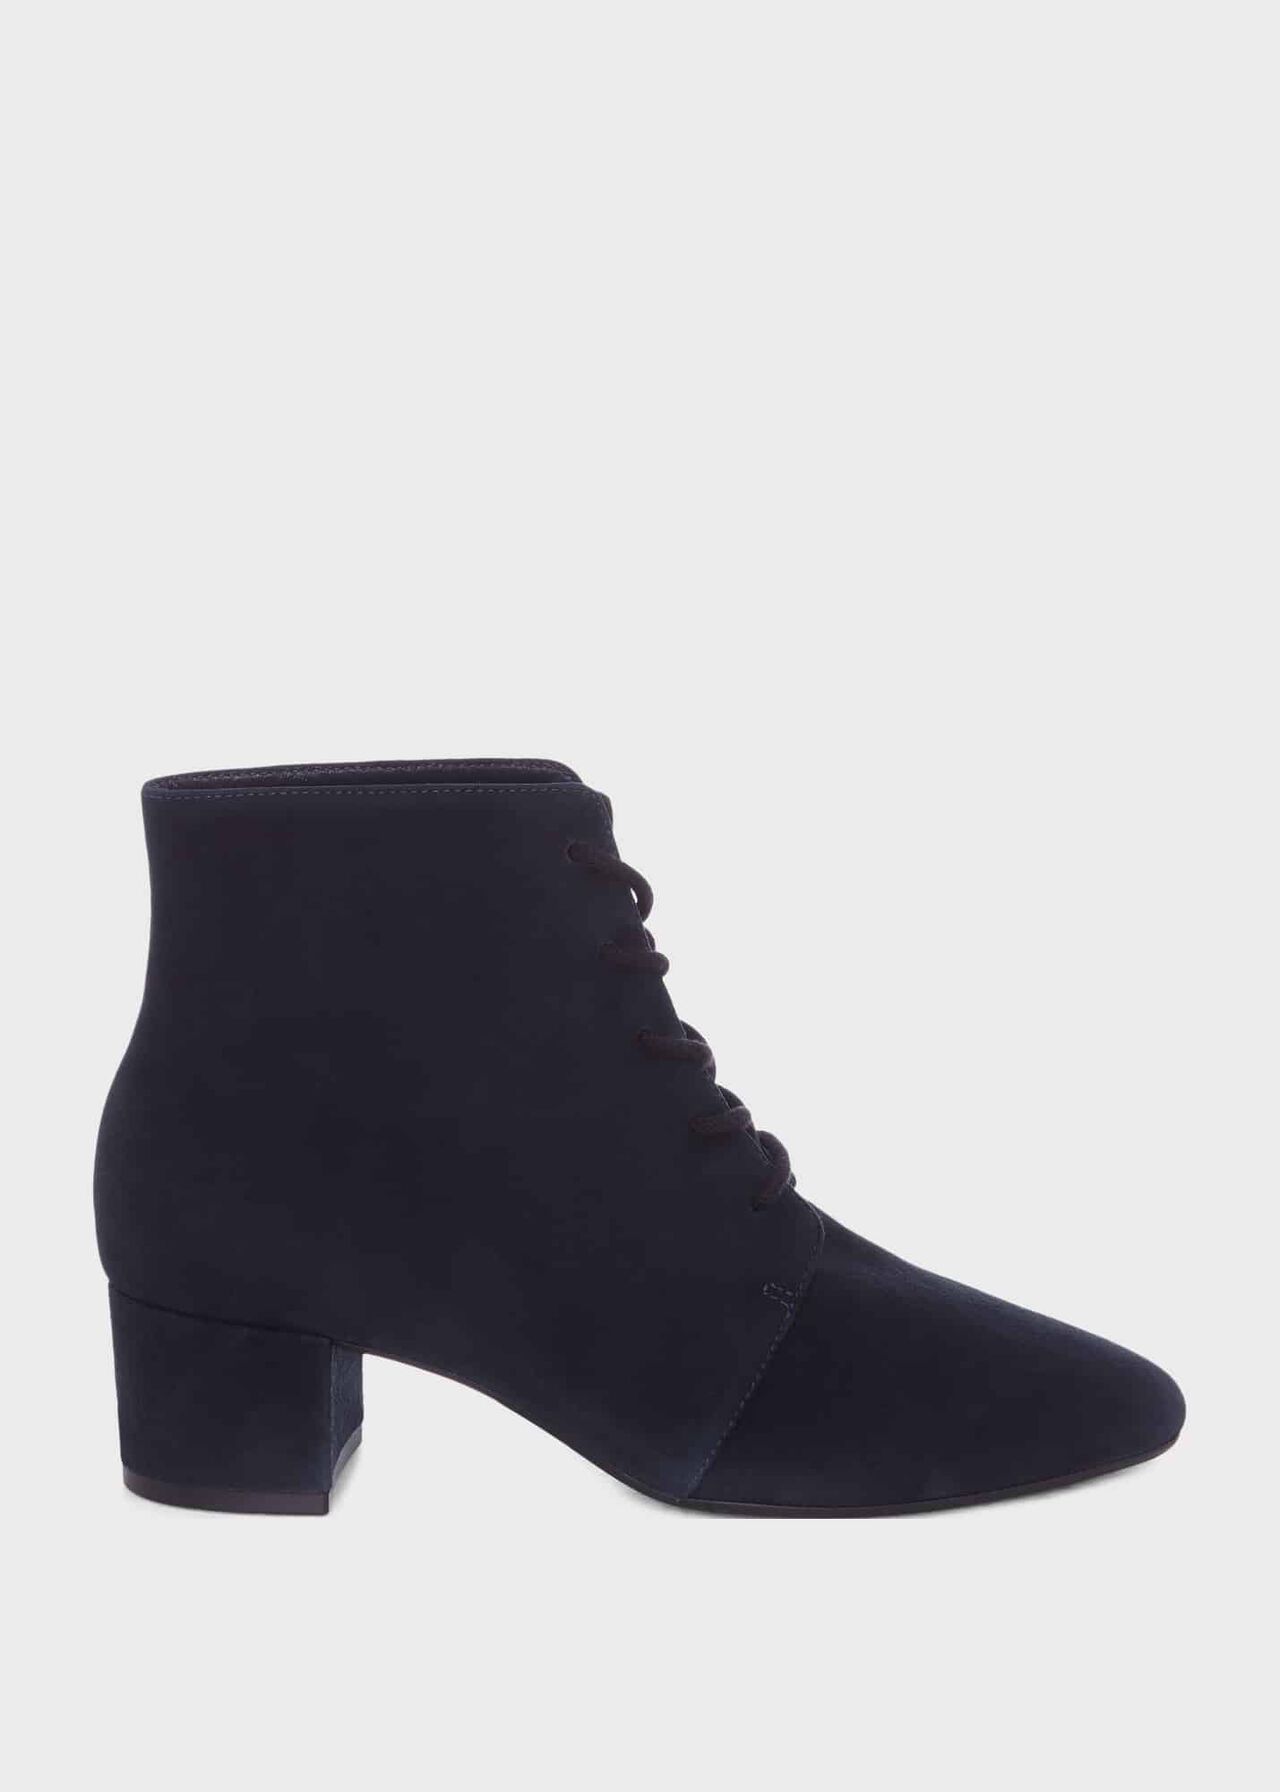 Hetty Lace Up Ankle Boot